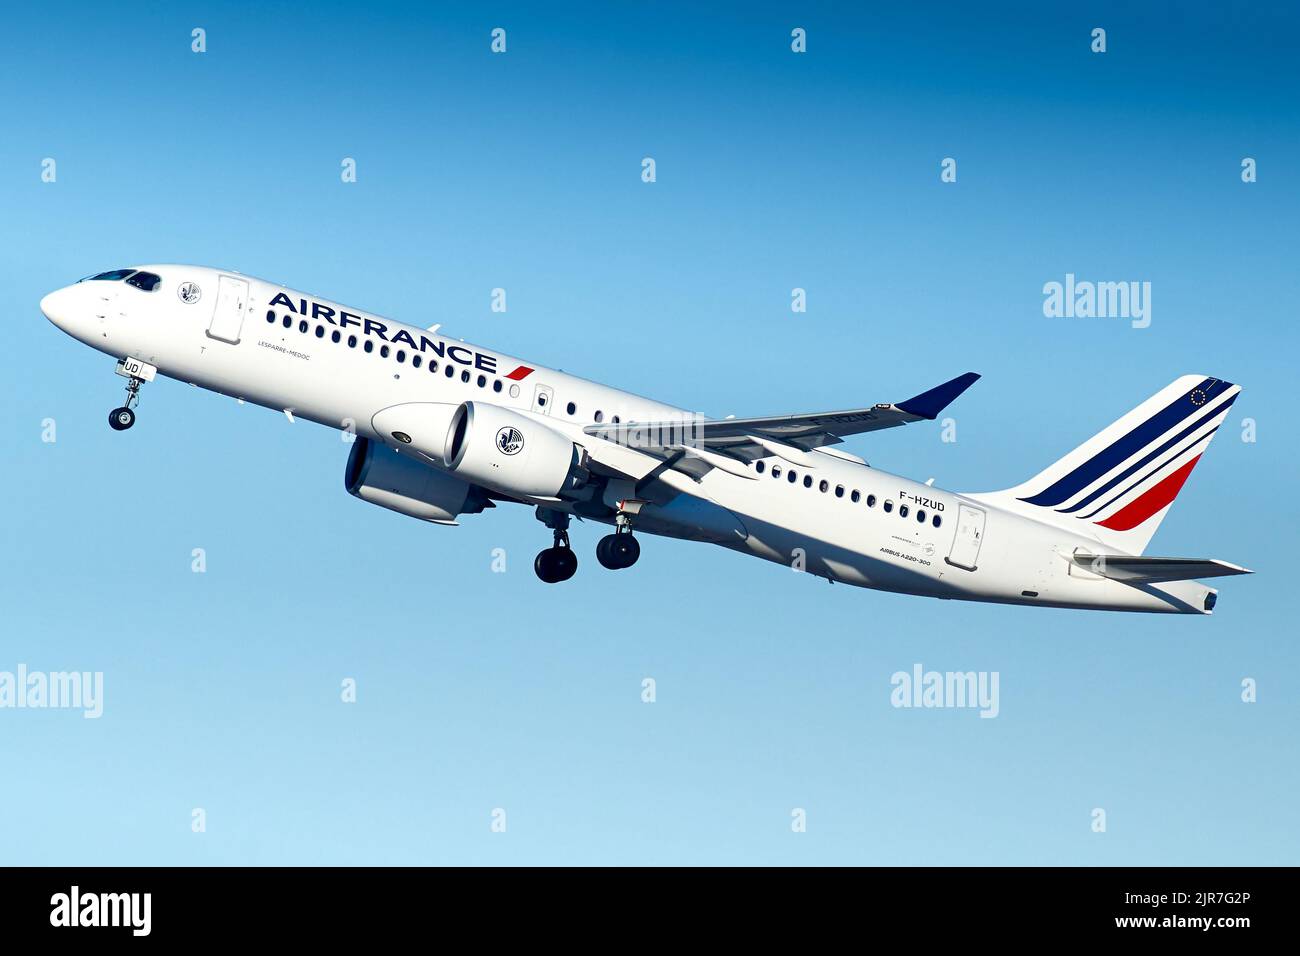 The Airfrance Airbus A220-300 plane departing Berlin Brandenburg airport to Paris, France Stock Photo